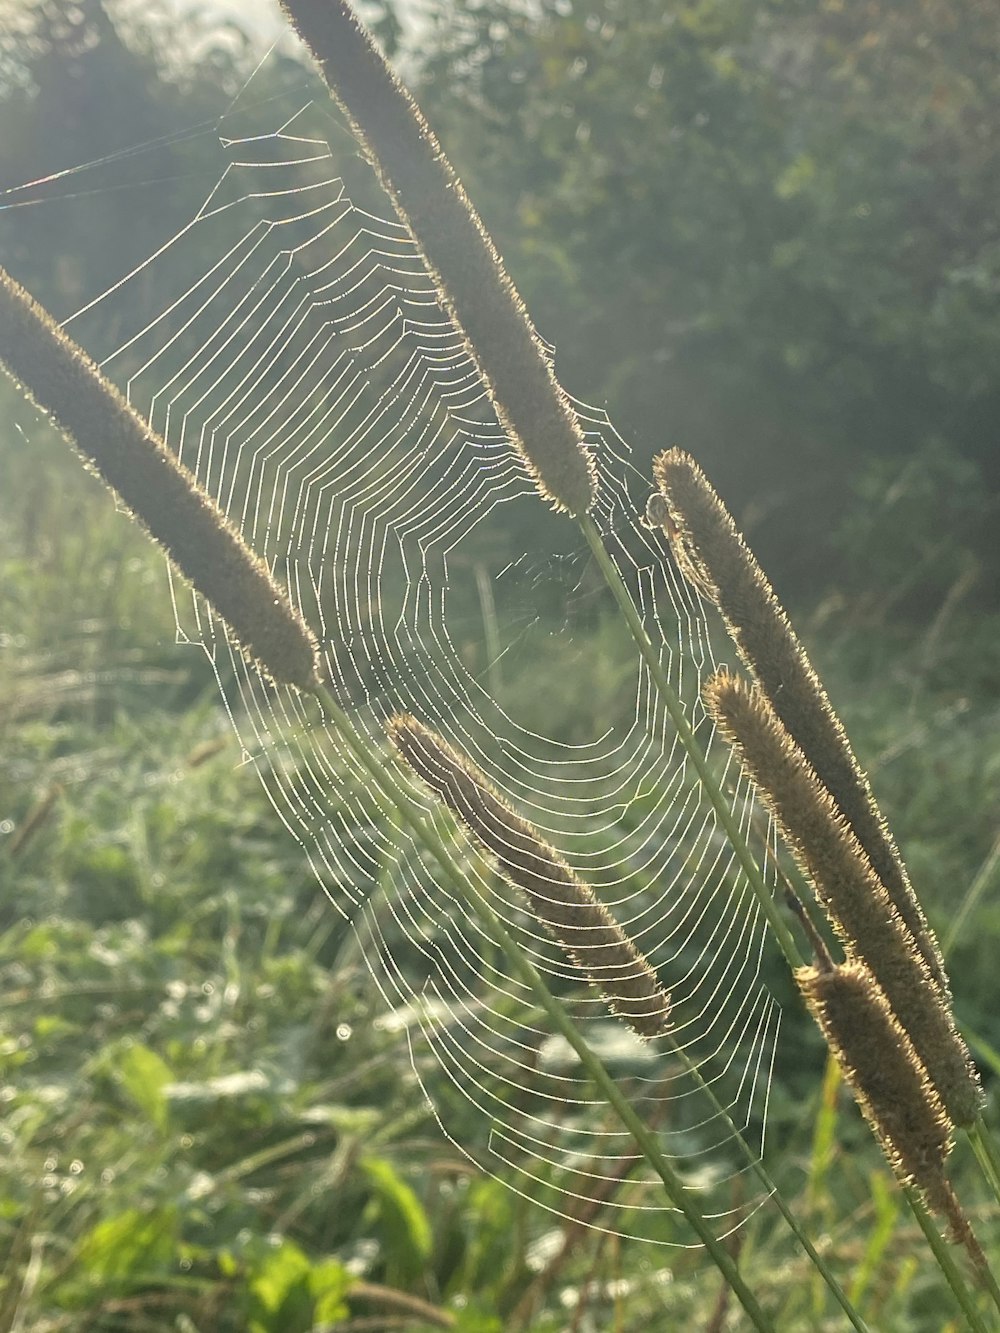 a spider web in the middle of a field